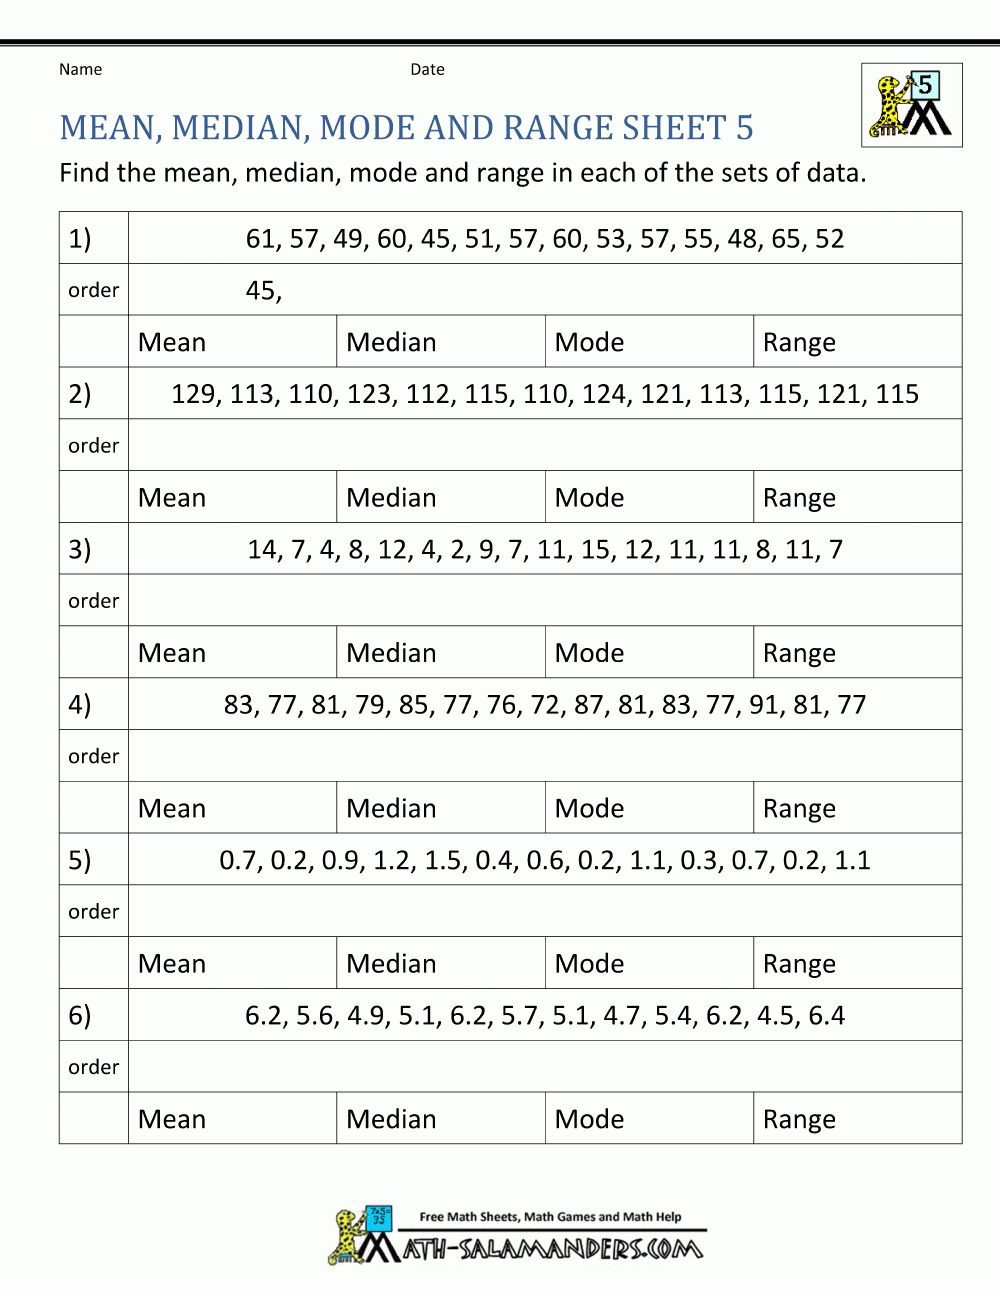 mean-median-mode-range-worksheets-with-answers-db-excel